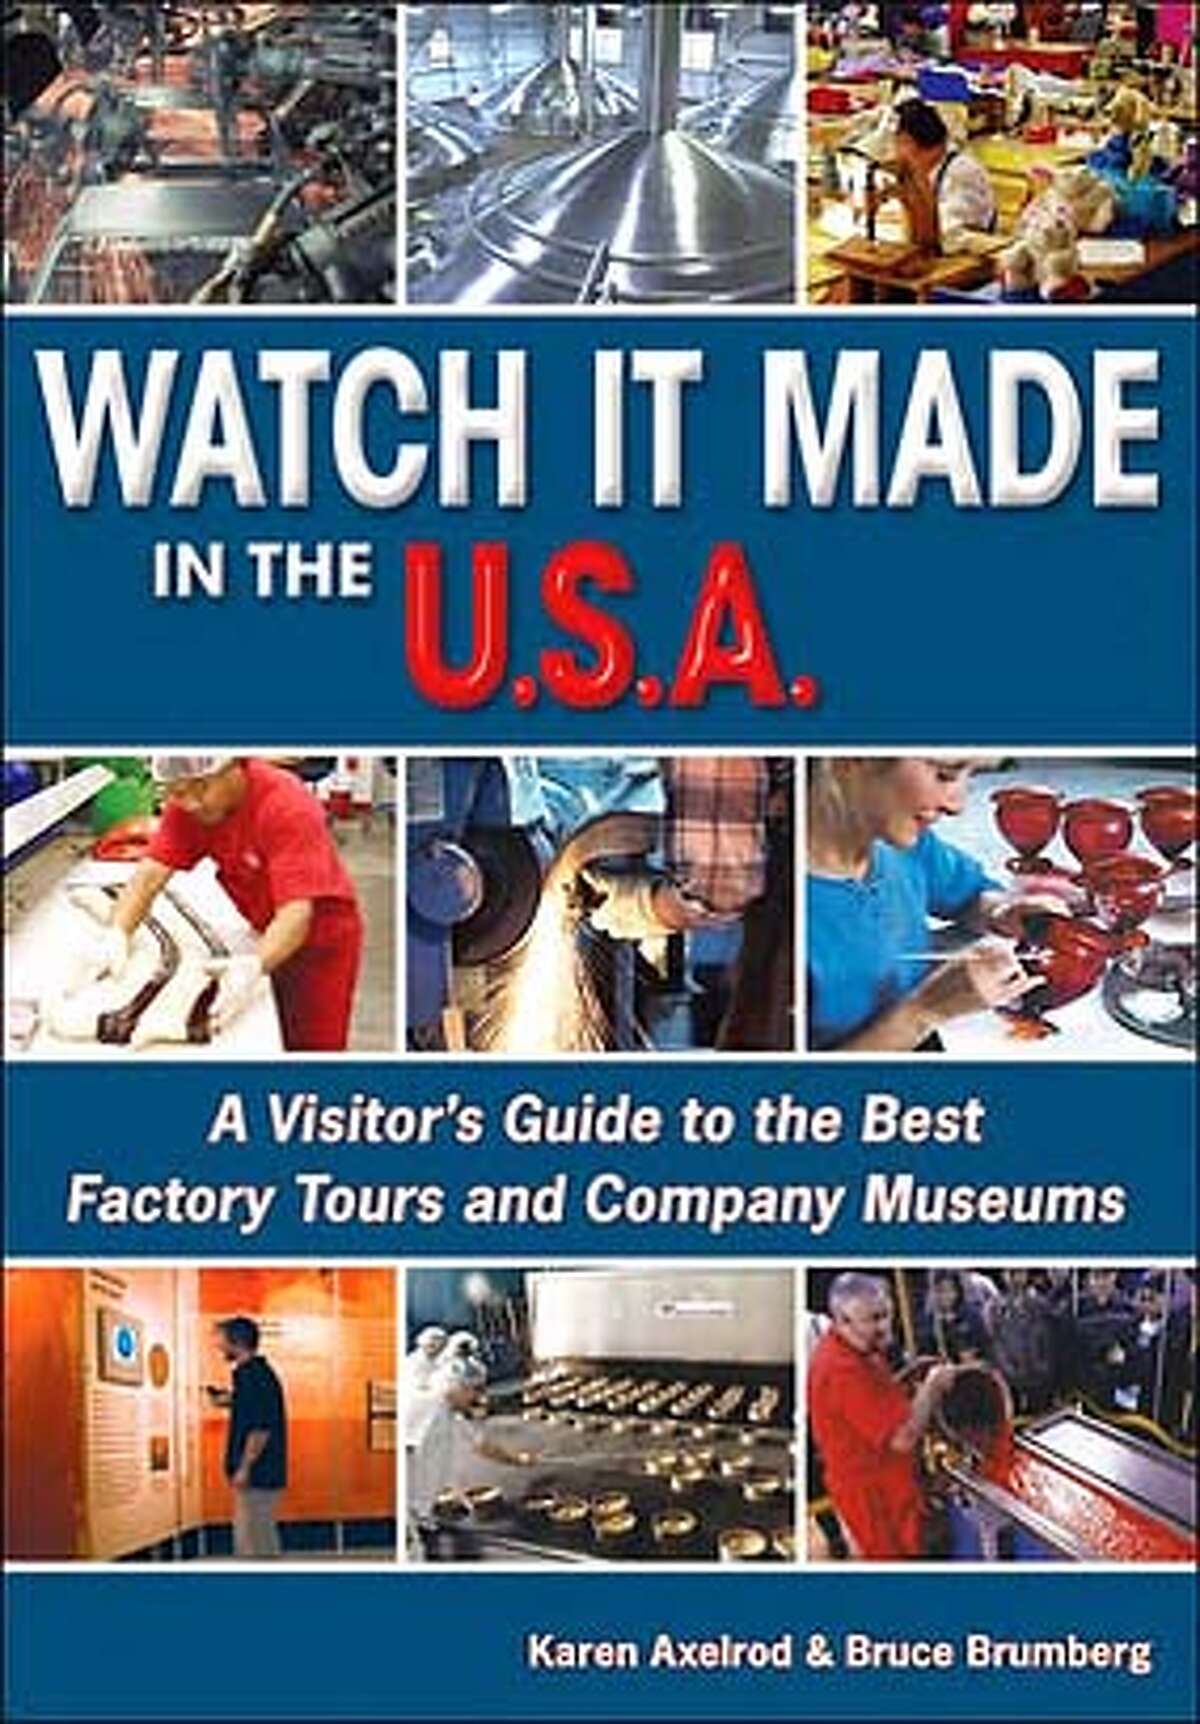 � TRAVEL - GUIDEBOOK GUIDE column 6/28/07, by Christine Delsol. "Watch it Made in the U.S.A." by Karen Axelrod and Bruce Brumberg, (Avalon, $21.95).